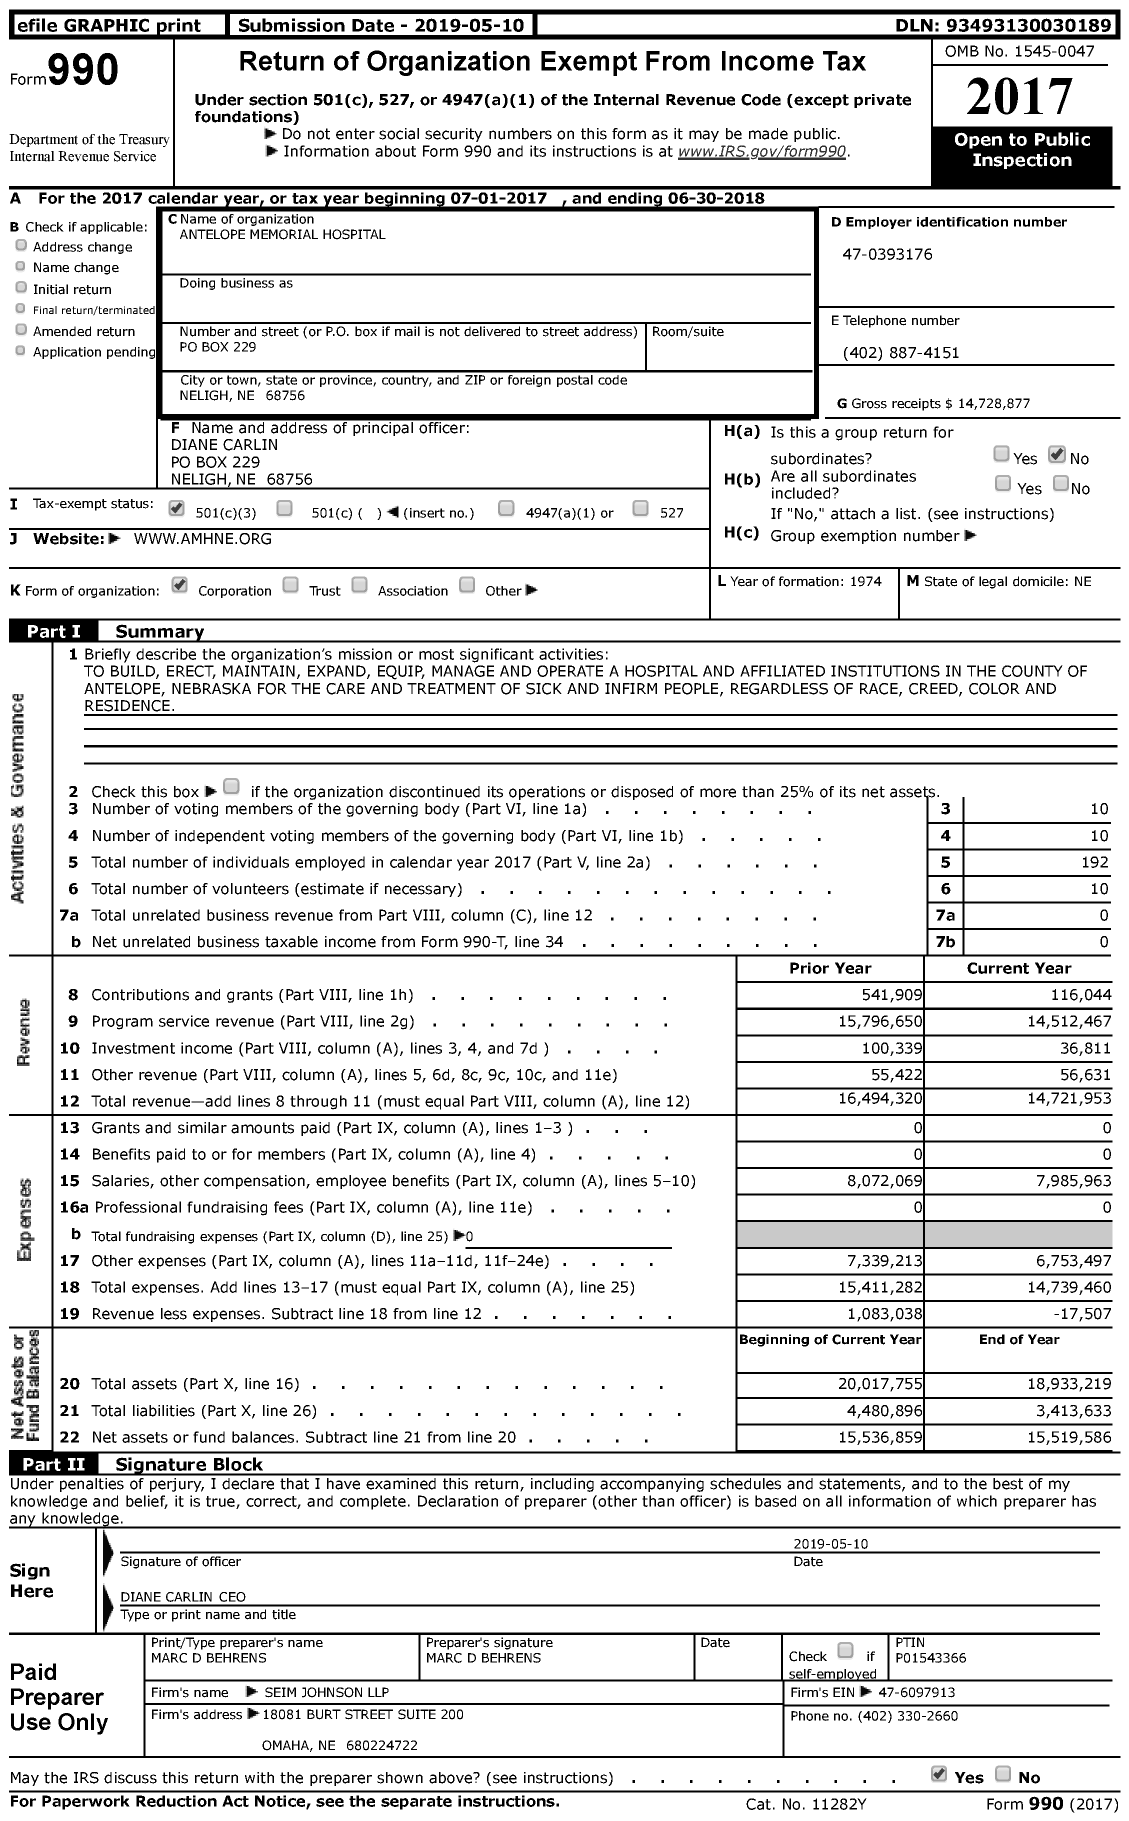 Image of first page of 2017 Form 990 for Antelope Memorial Hospital (AMH)